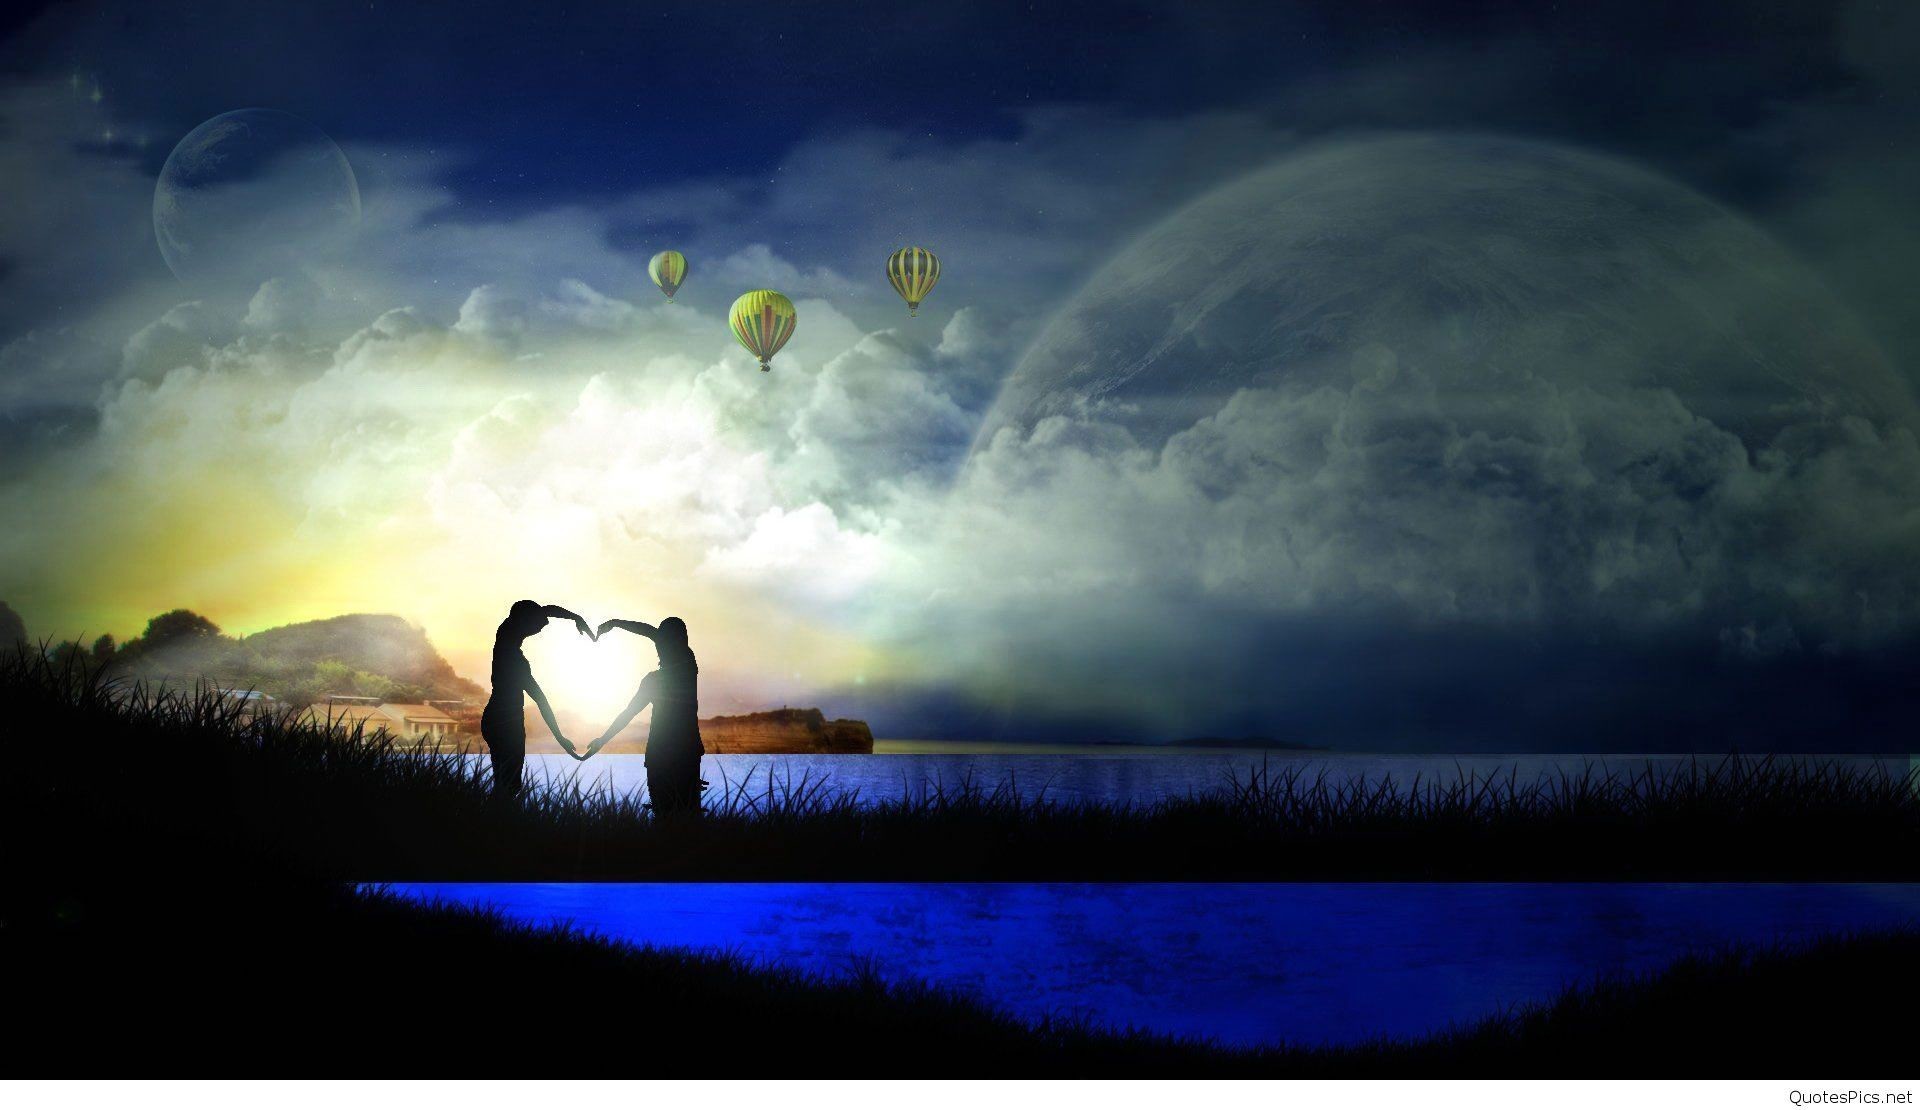 1920x1110 fantasy-couple-love-animated-full-screen-high-resolution-wallpaper -free-desktop-background-images-download-wallpaper-wallpaper -of-windows-colorful-1920x1080